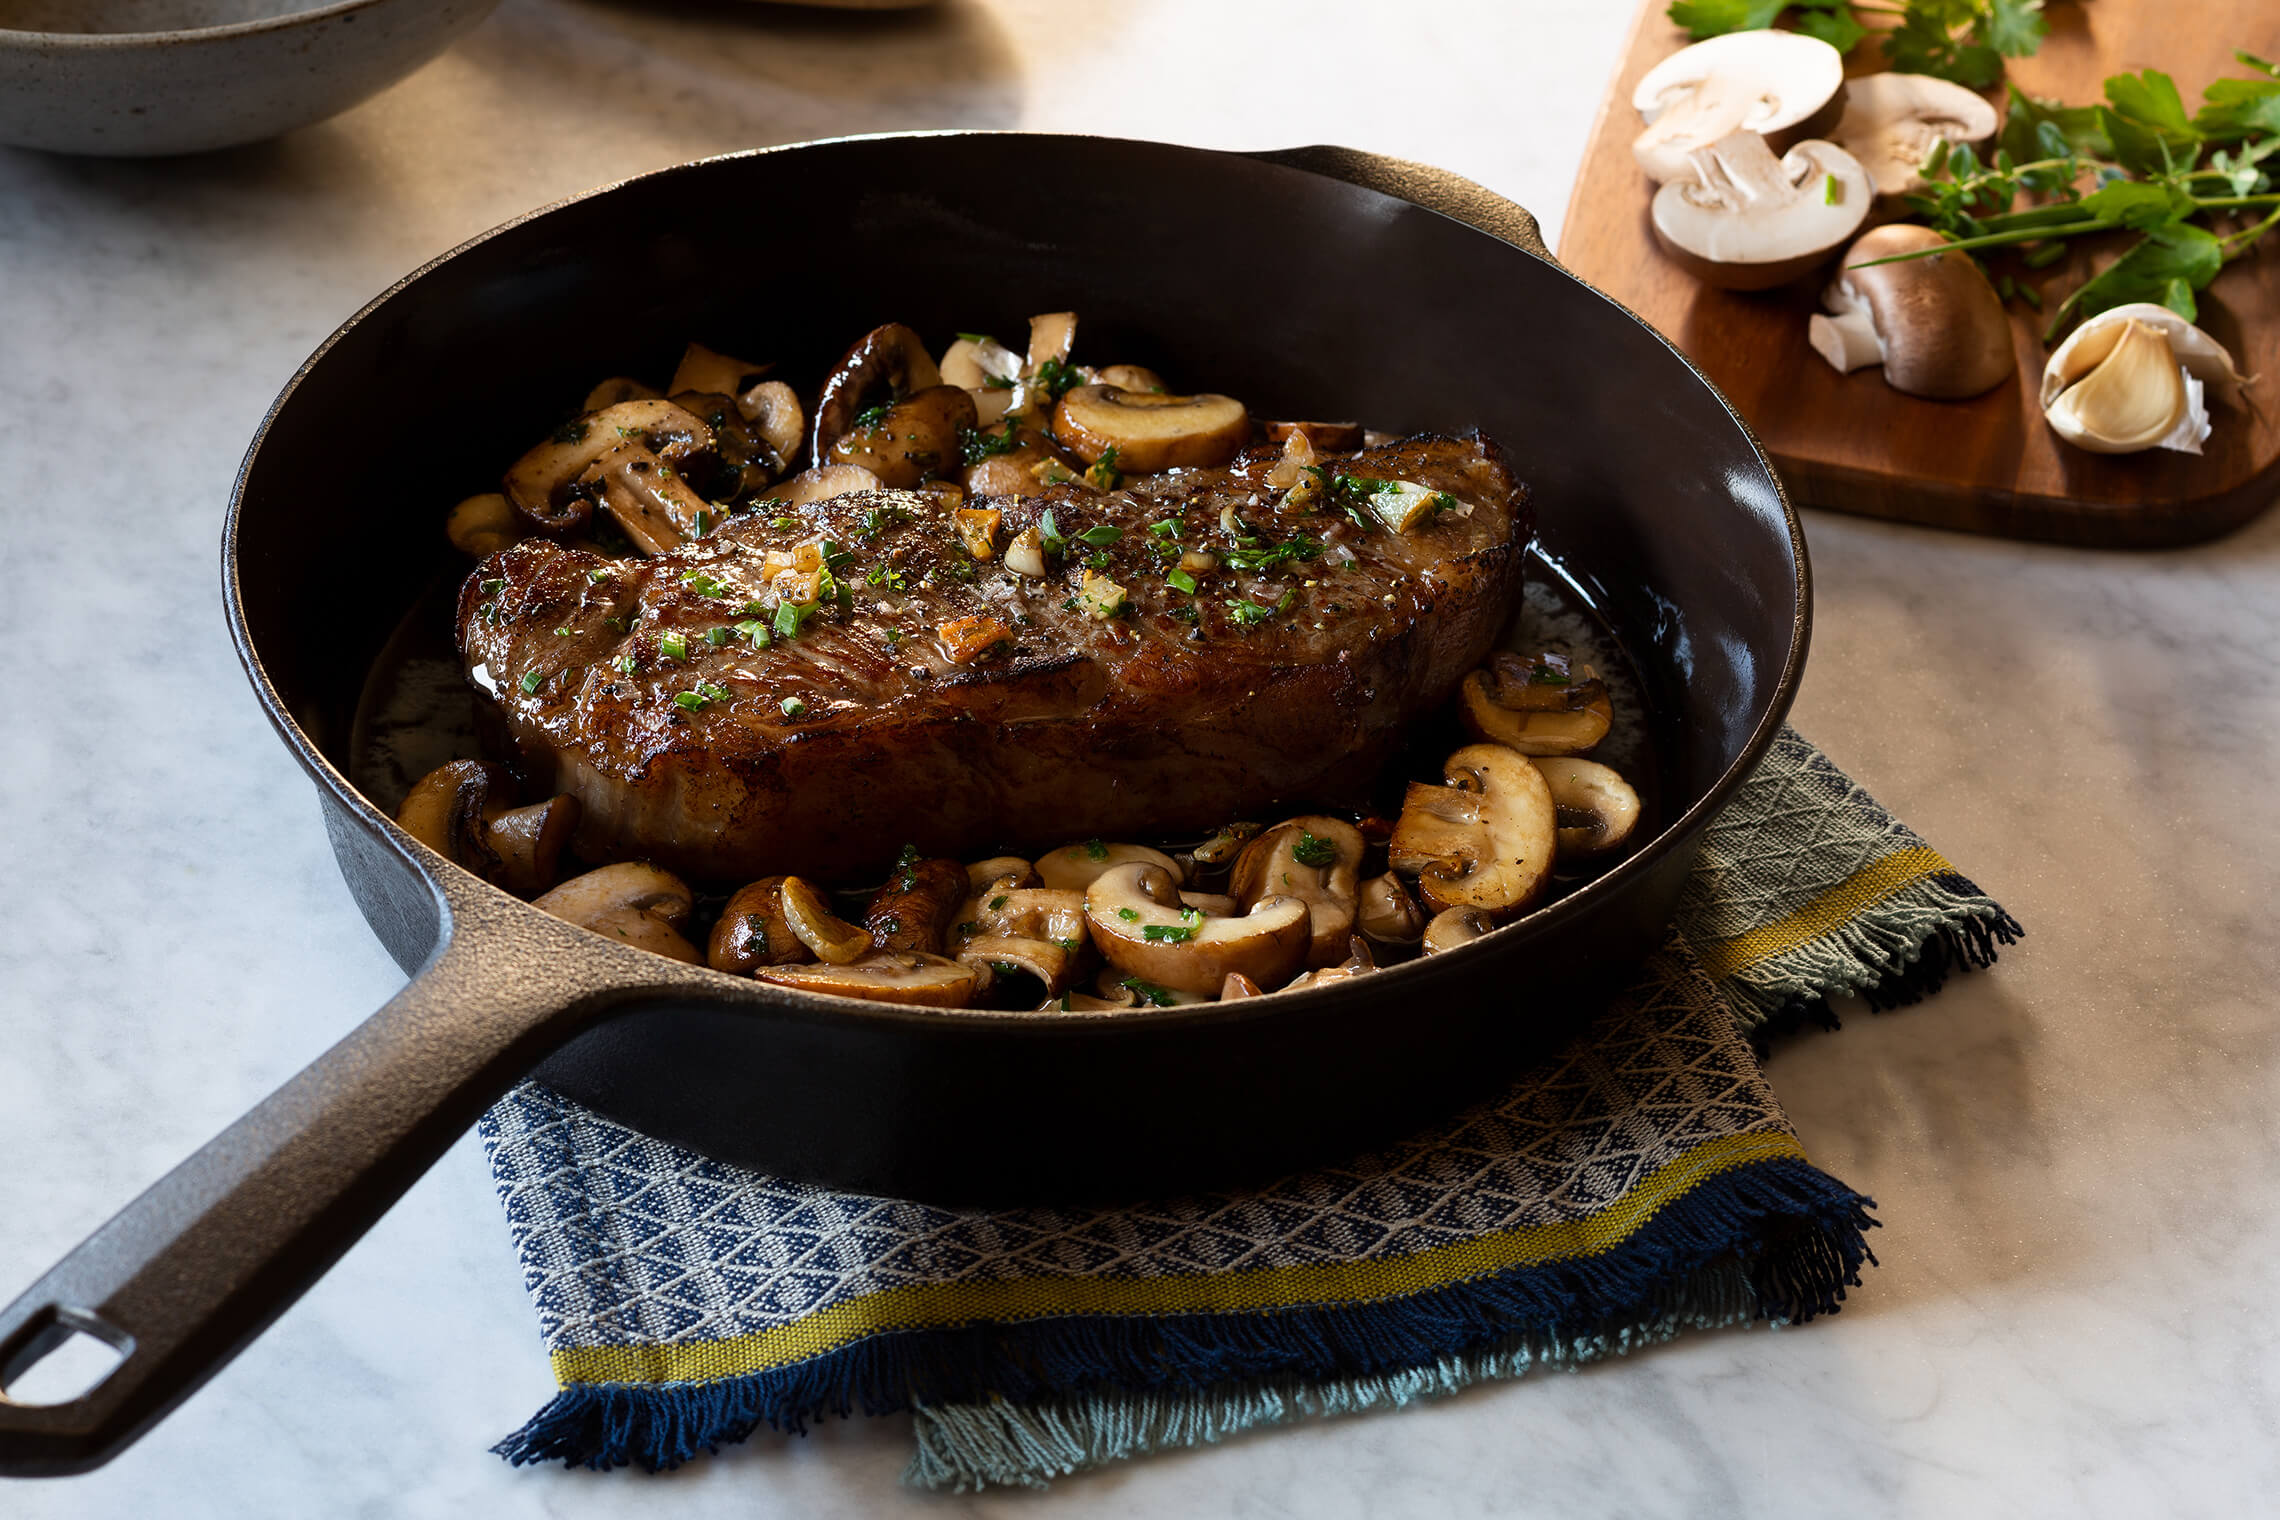 Pan Seared Steak with Garlic Herb Butter and Mushrooms